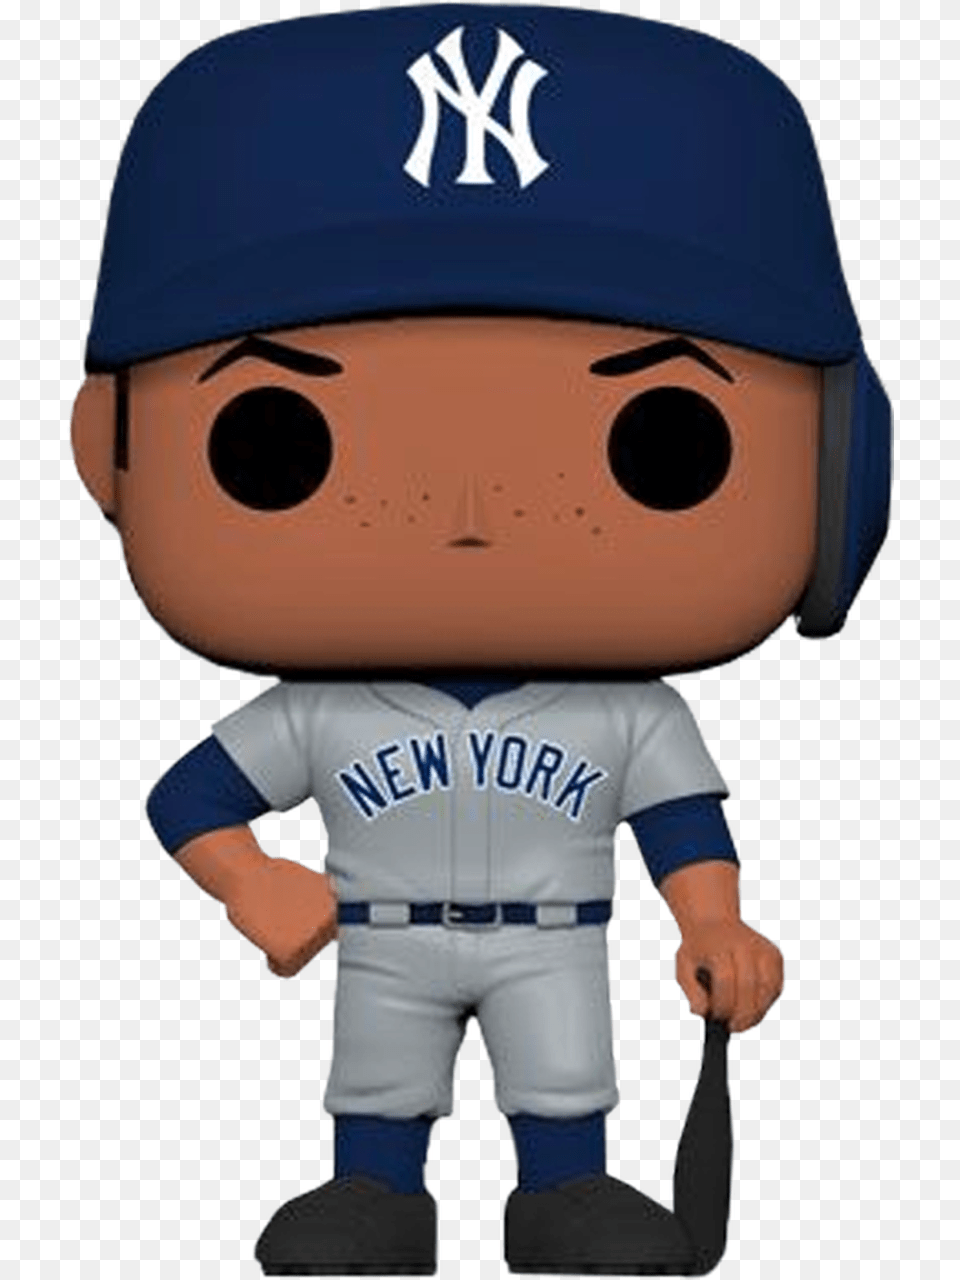 Aaron Judge New York Yankees Pop Vinyl Figure Logos And Uniforms Of The New York Yankees, People, Person, Mascot, Baby Free Transparent Png